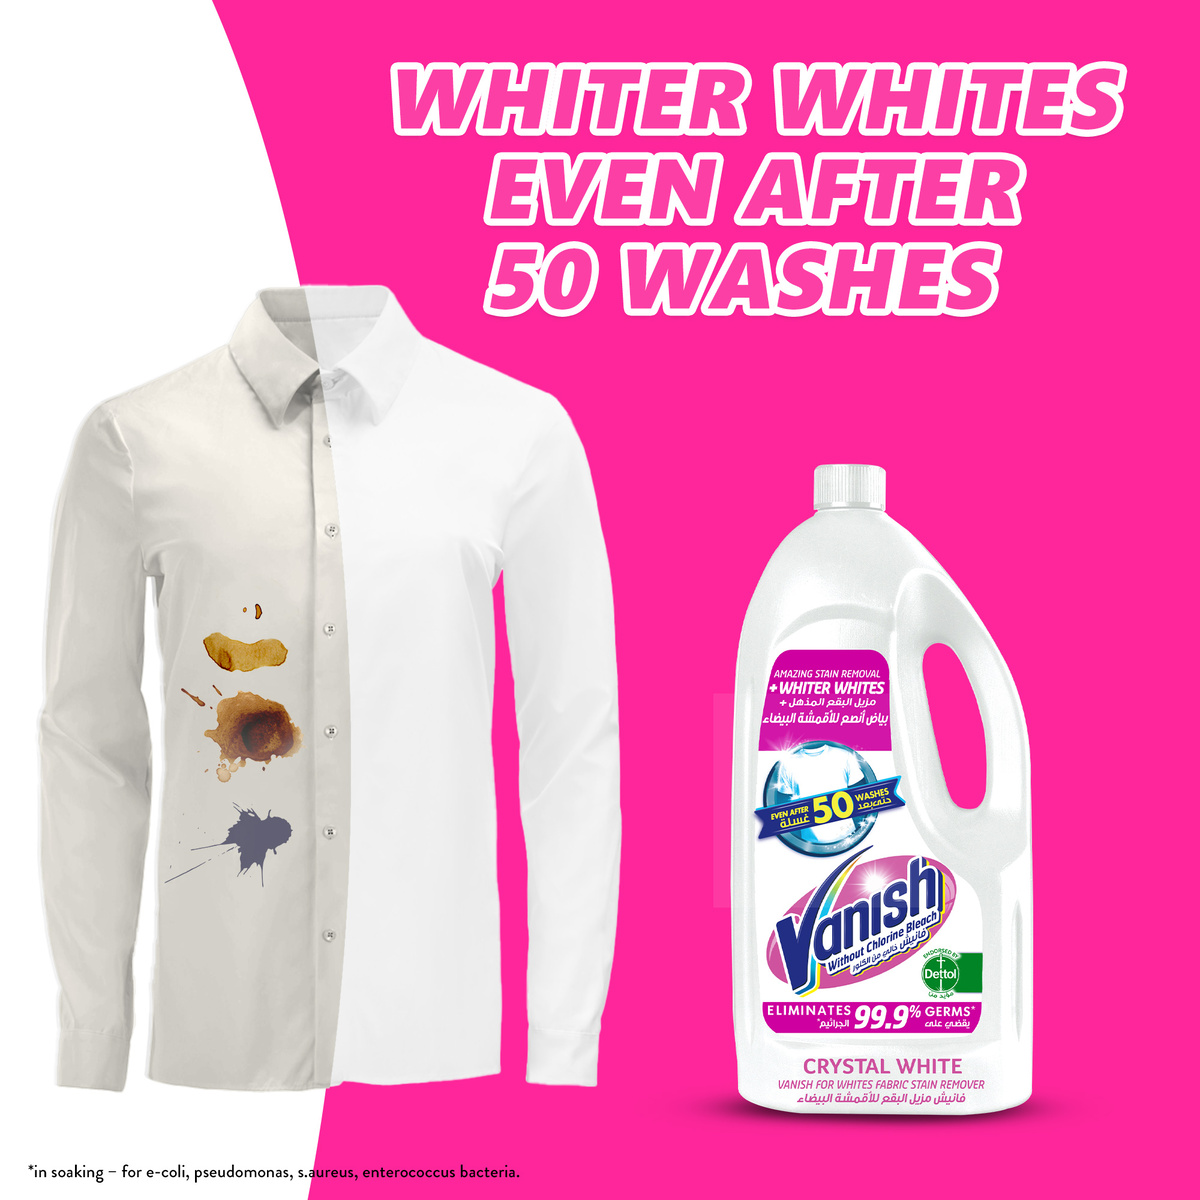 Vanish Fabric Stain Remover For Whites 3 Litres